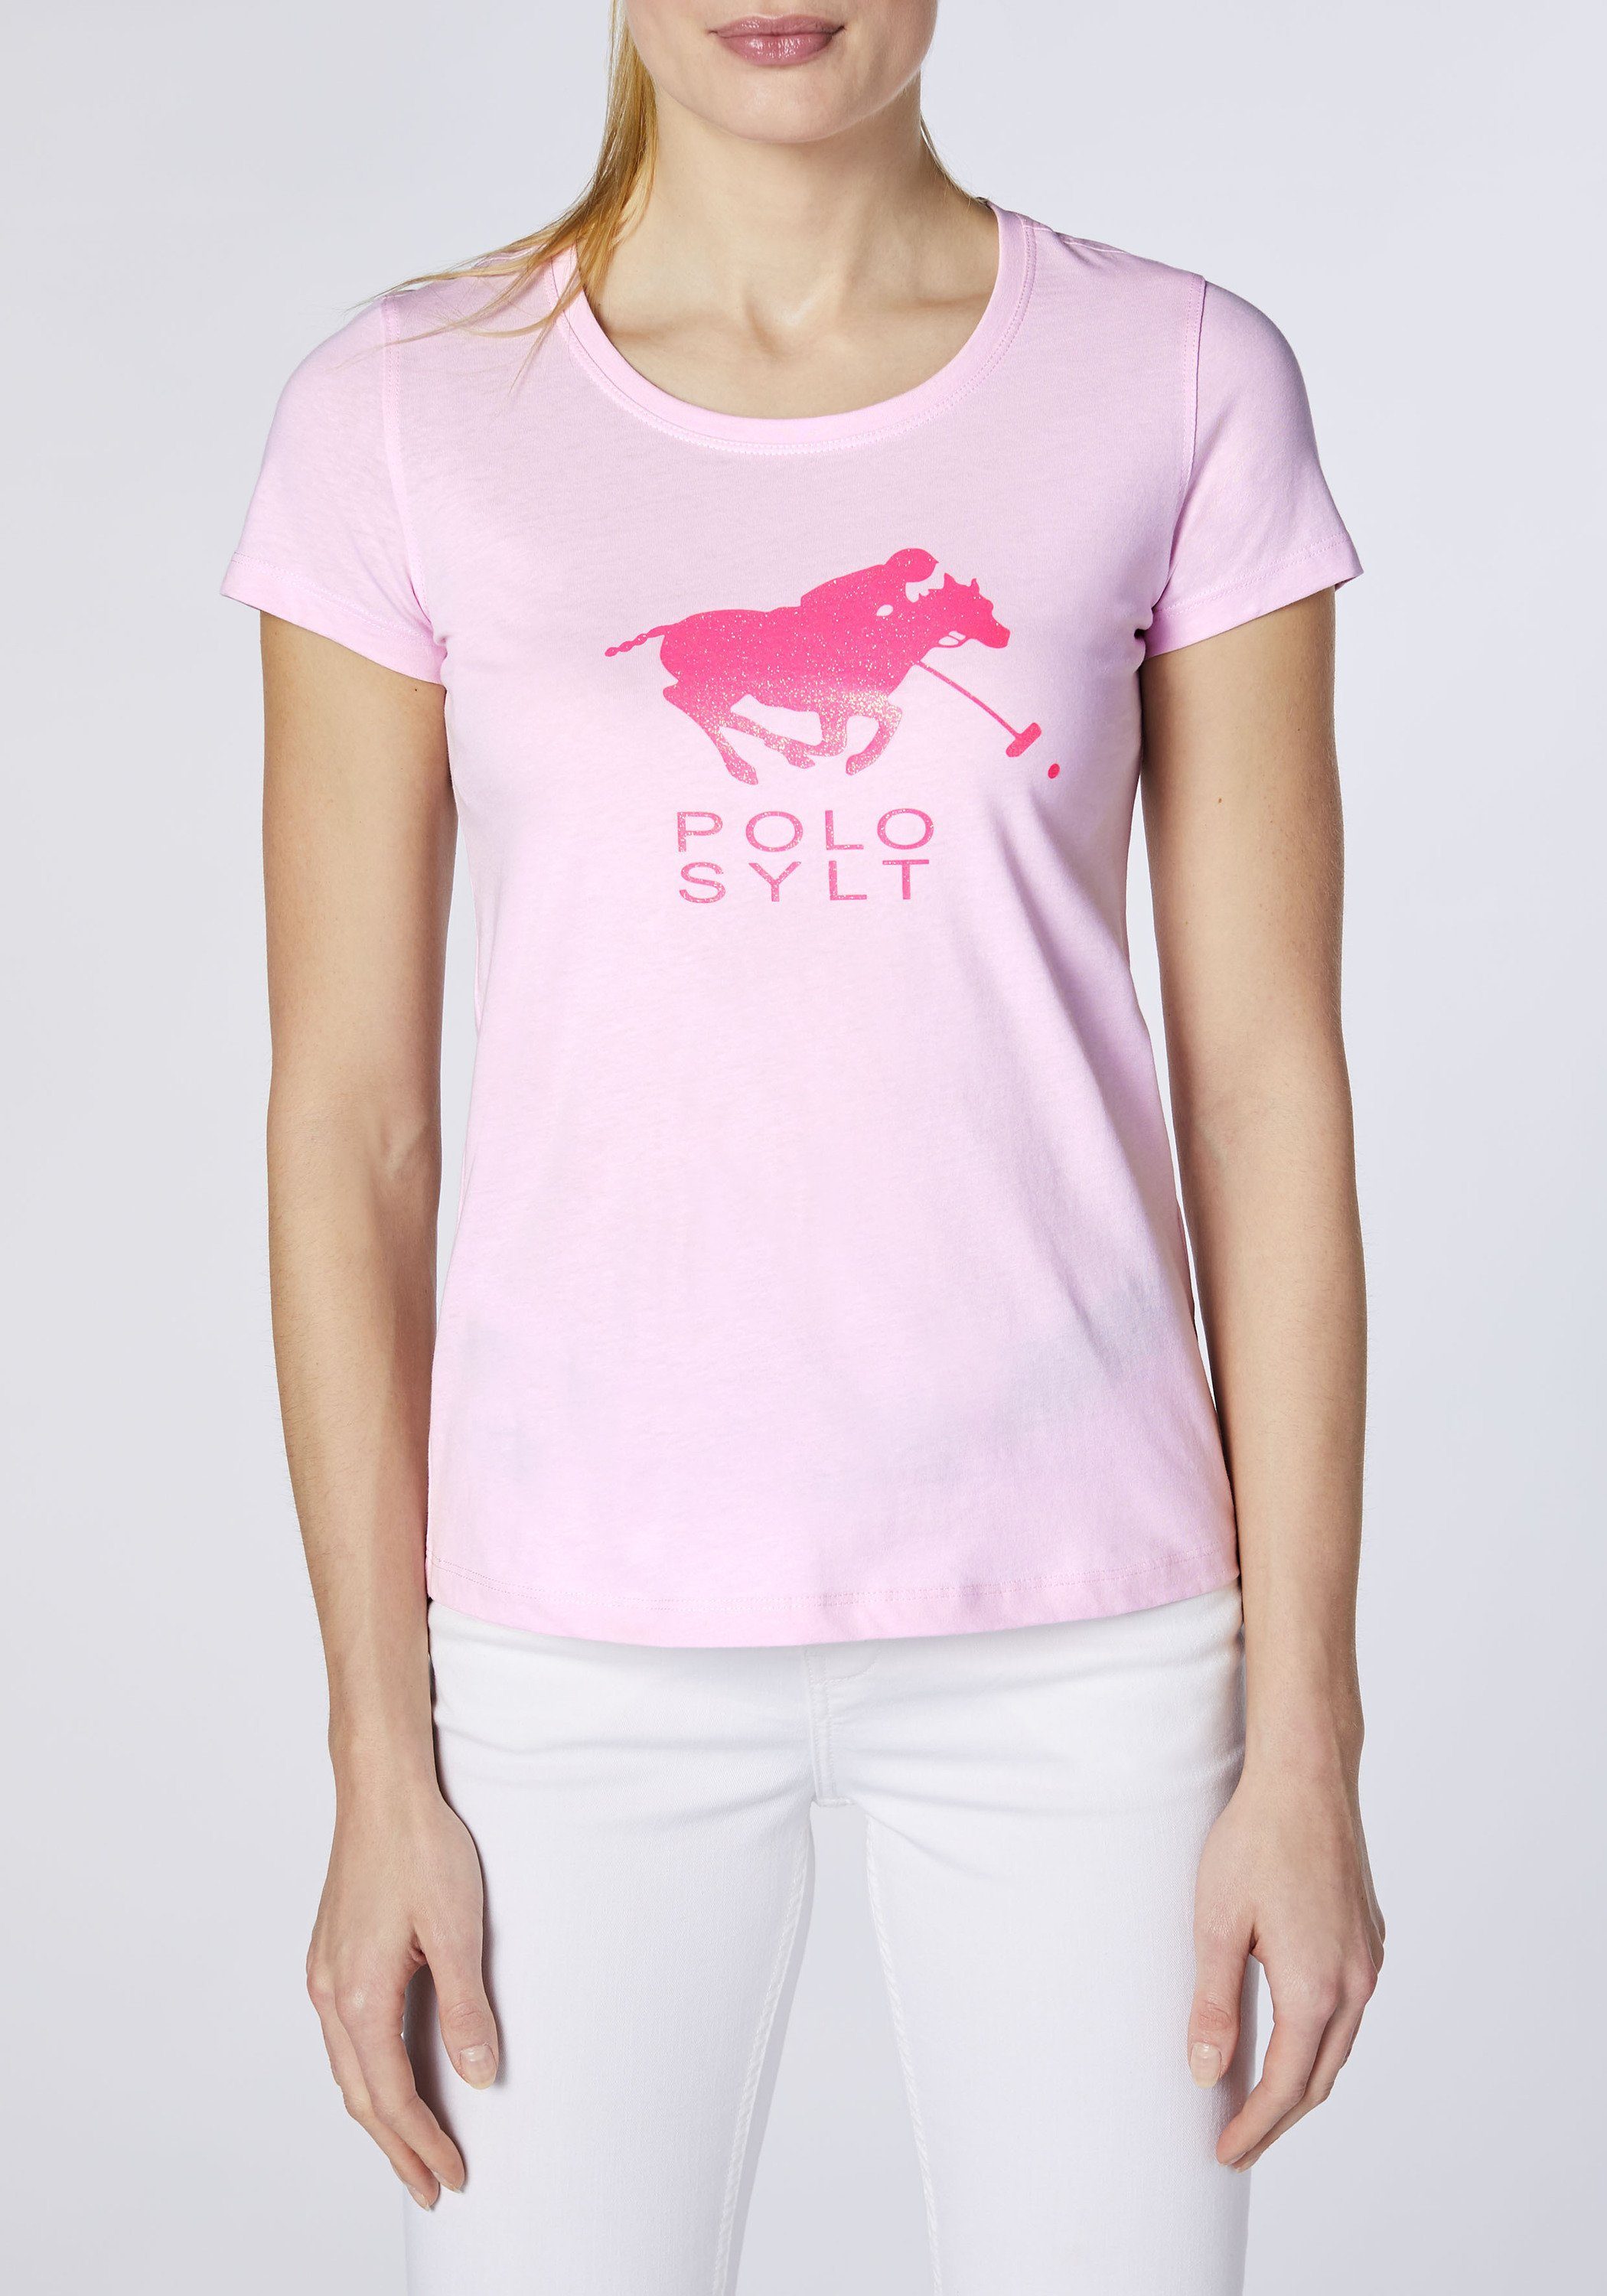 Polo Sylt Print-Shirt in figurbetonter Pink Lady Passform